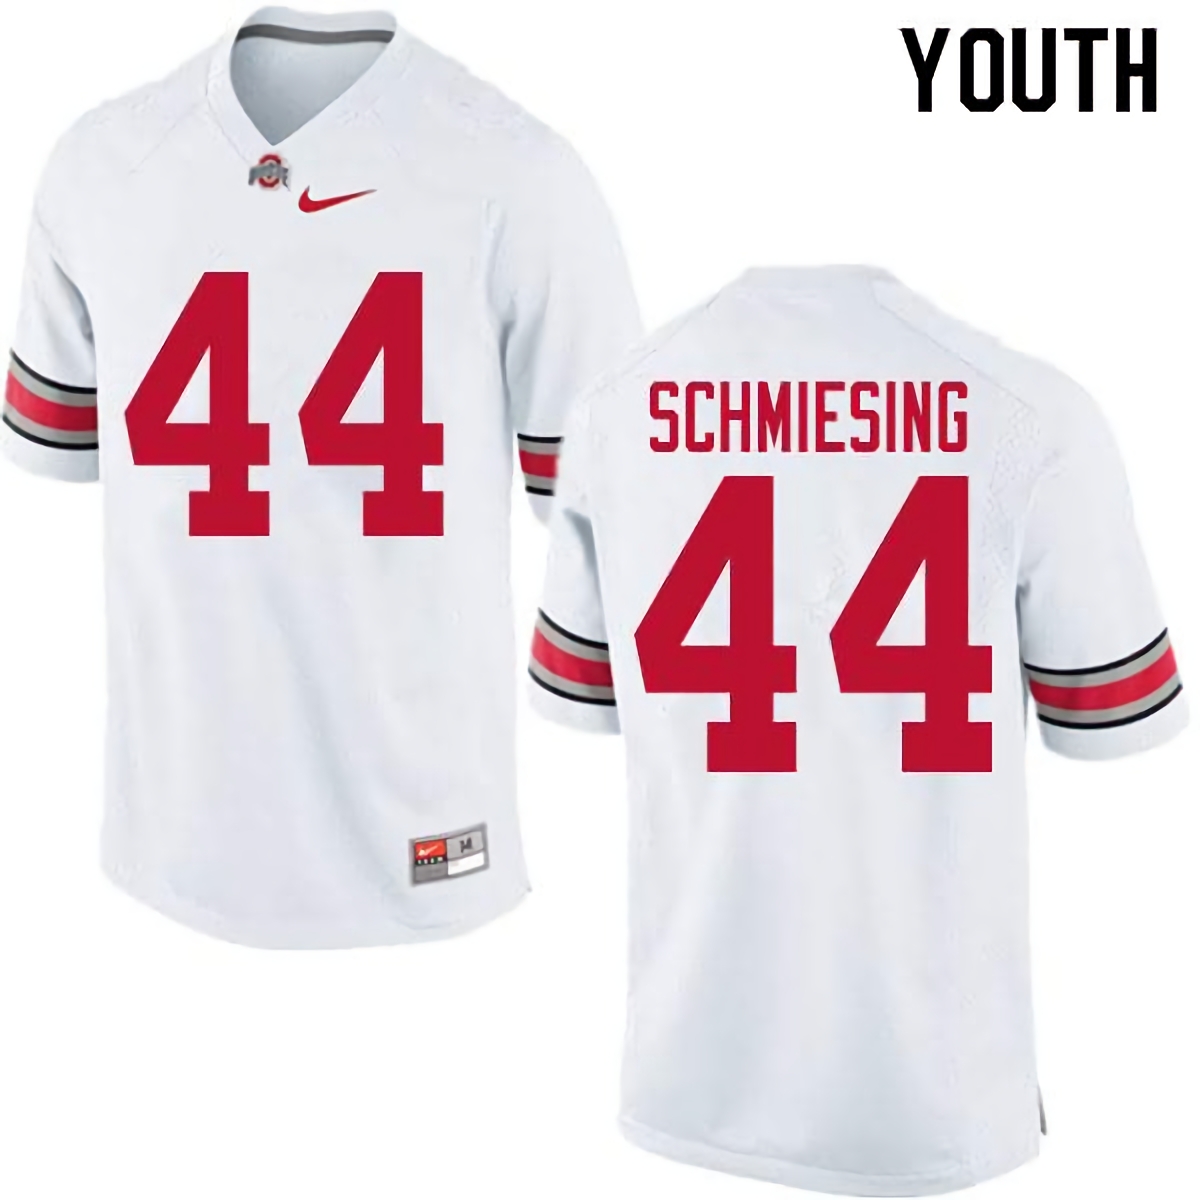 Ben Schmiesing Ohio State Buckeyes Youth NCAA #44 Nike White College Stitched Football Jersey EPM8656PM